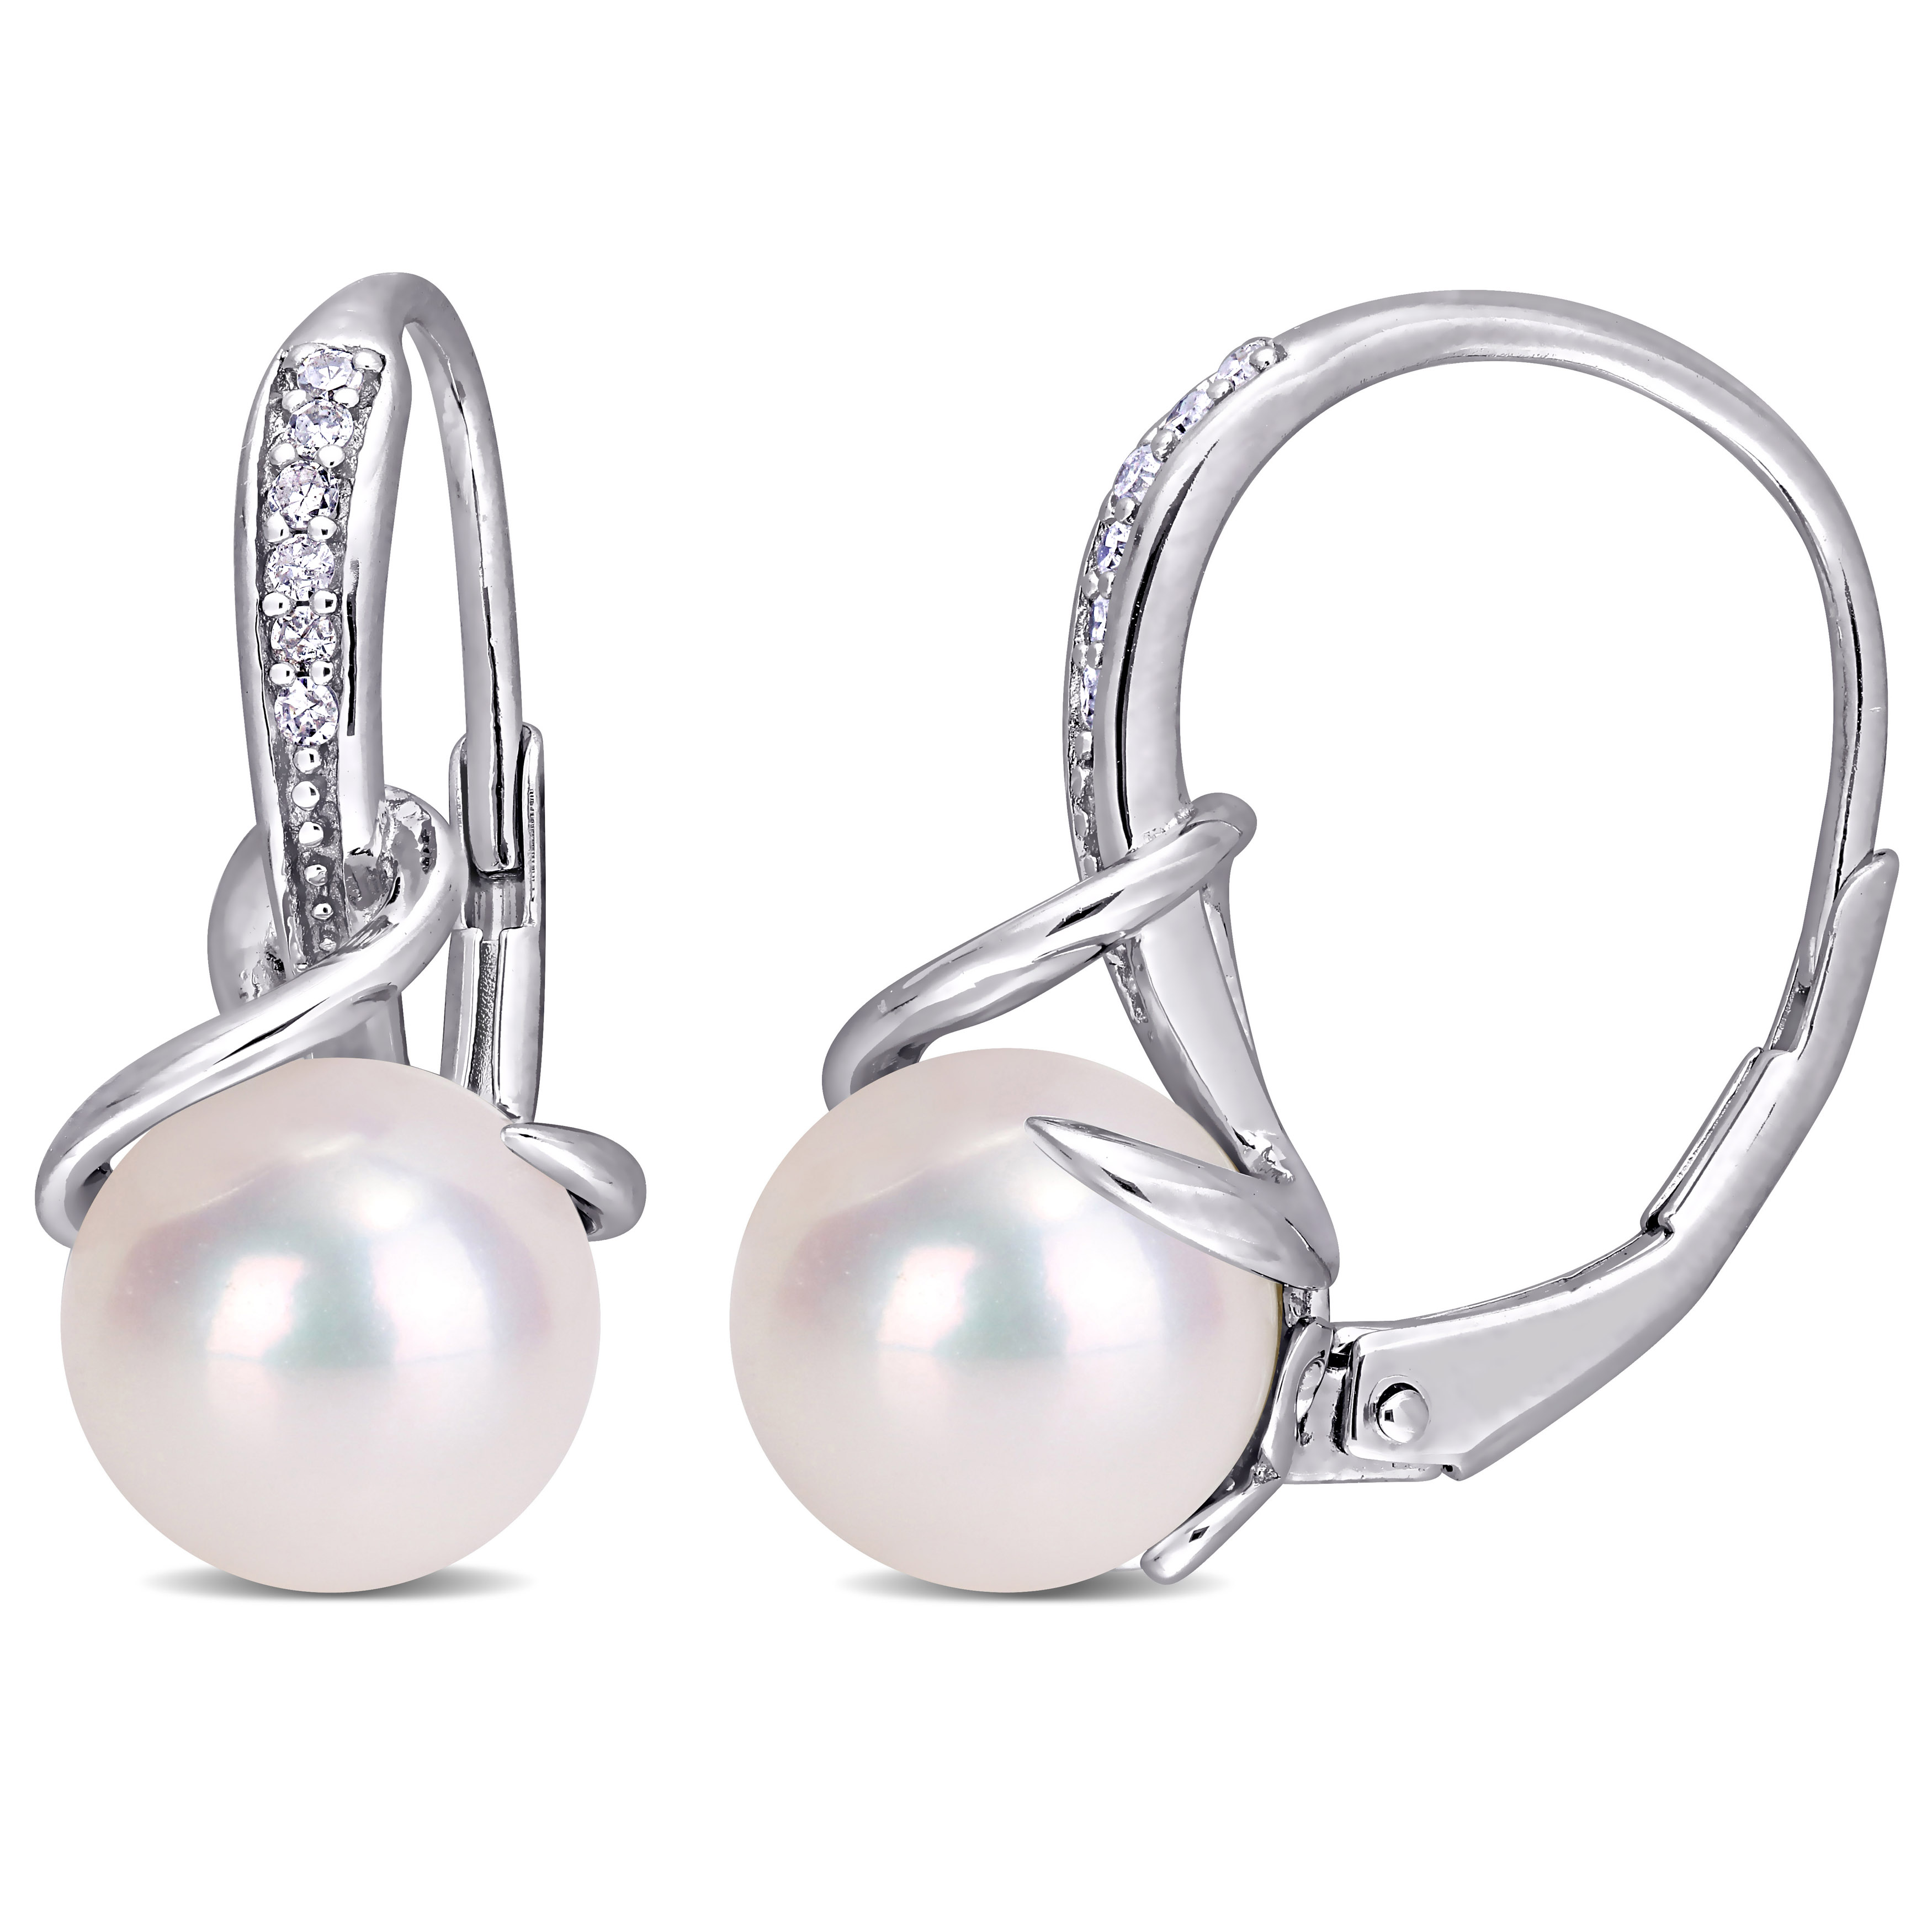 8 - 8.5 MM White Cultured Freshwater Pearl and Diamond Twist Leverback Earrings in Sterling Silver